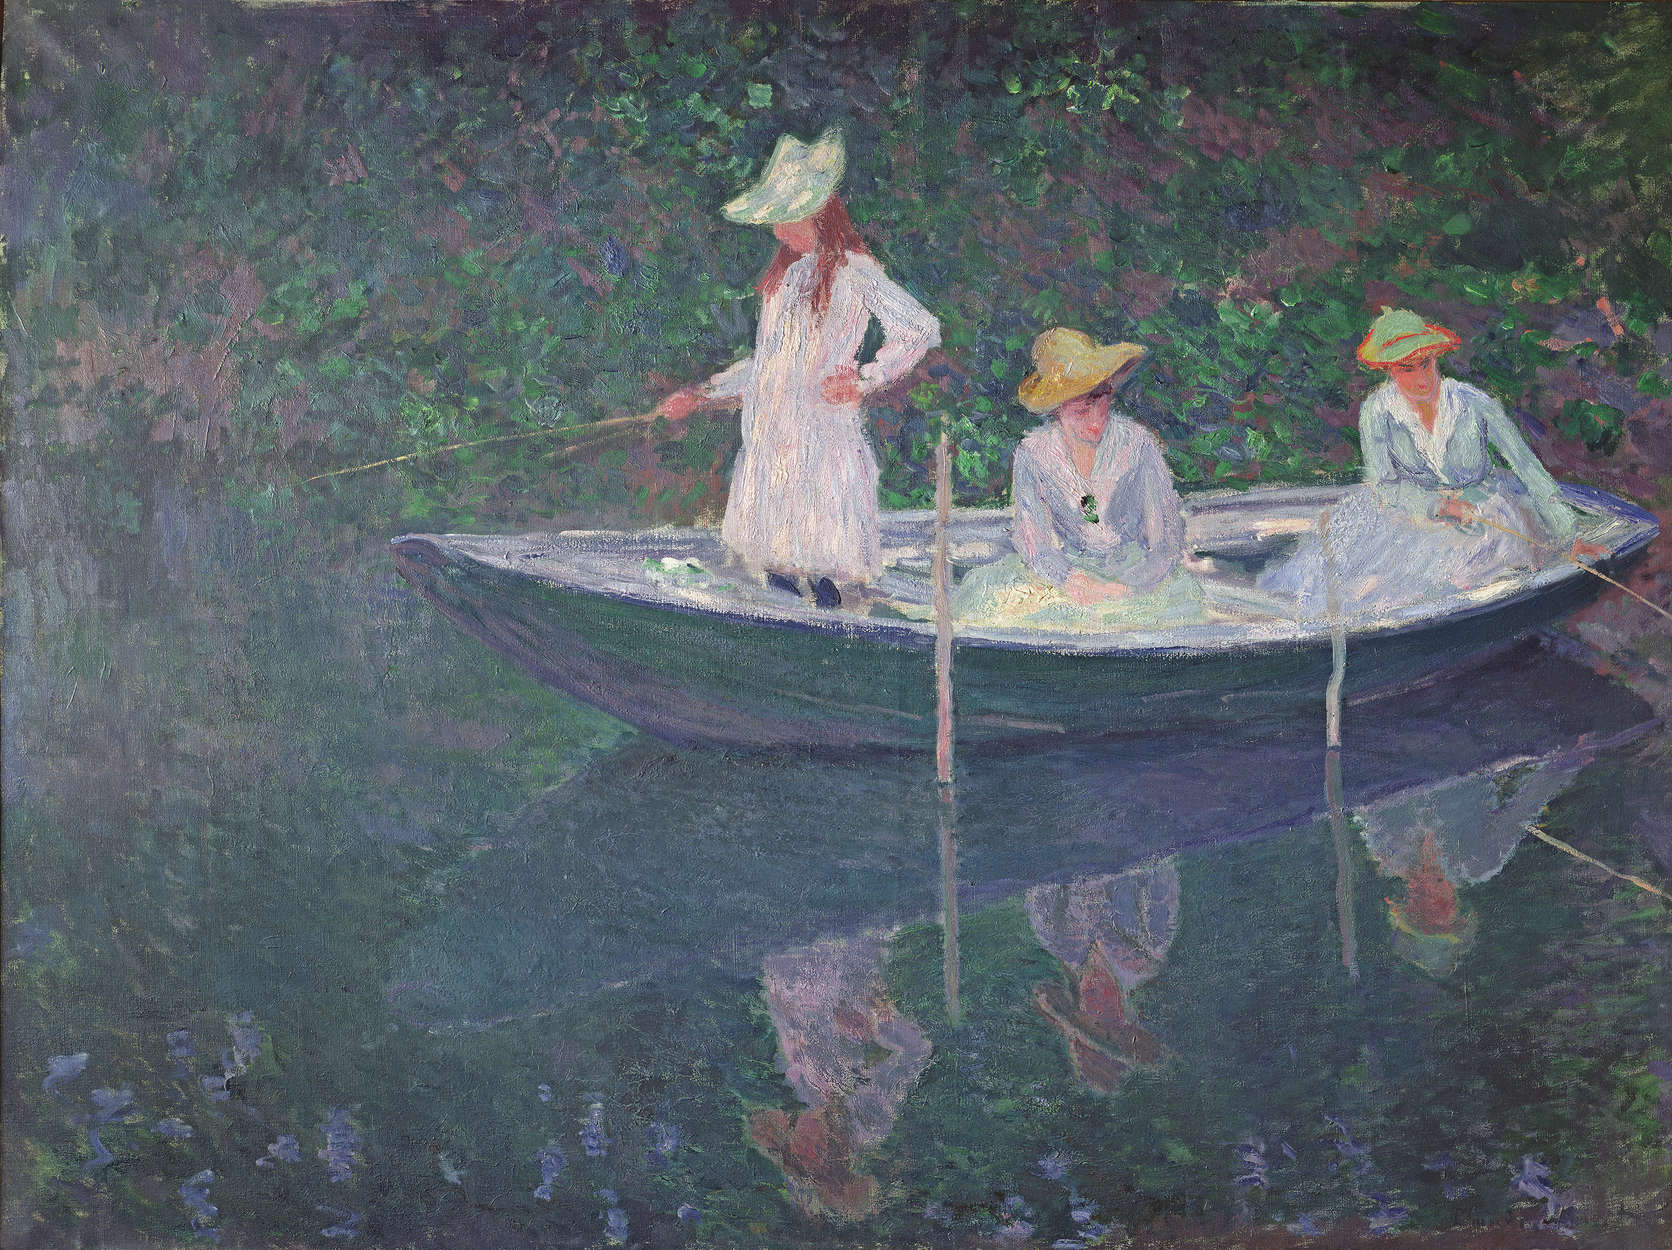             Photo wallpaper "The boat in Giverny" by Claude Monet
        